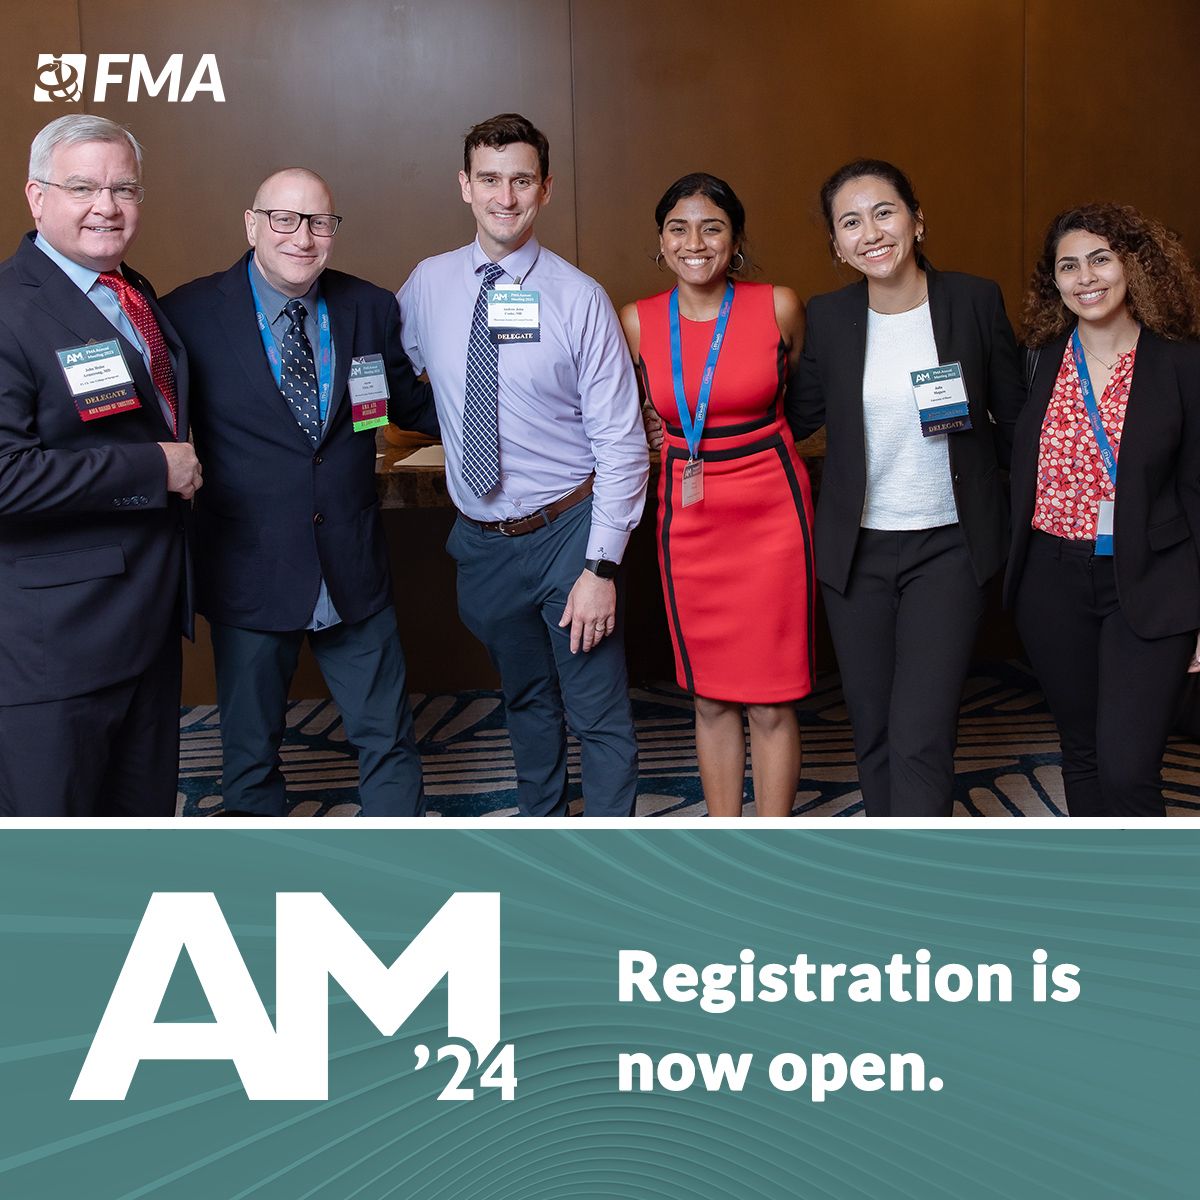 Registration is open for the 2024 FMA Annual Meeting to celebrate the FMA's 150th birthday! Join us for a celebration of our rich history, networking, state-mandated CME, and more! This is a year you don't want to miss: buff.ly/3IpaVii